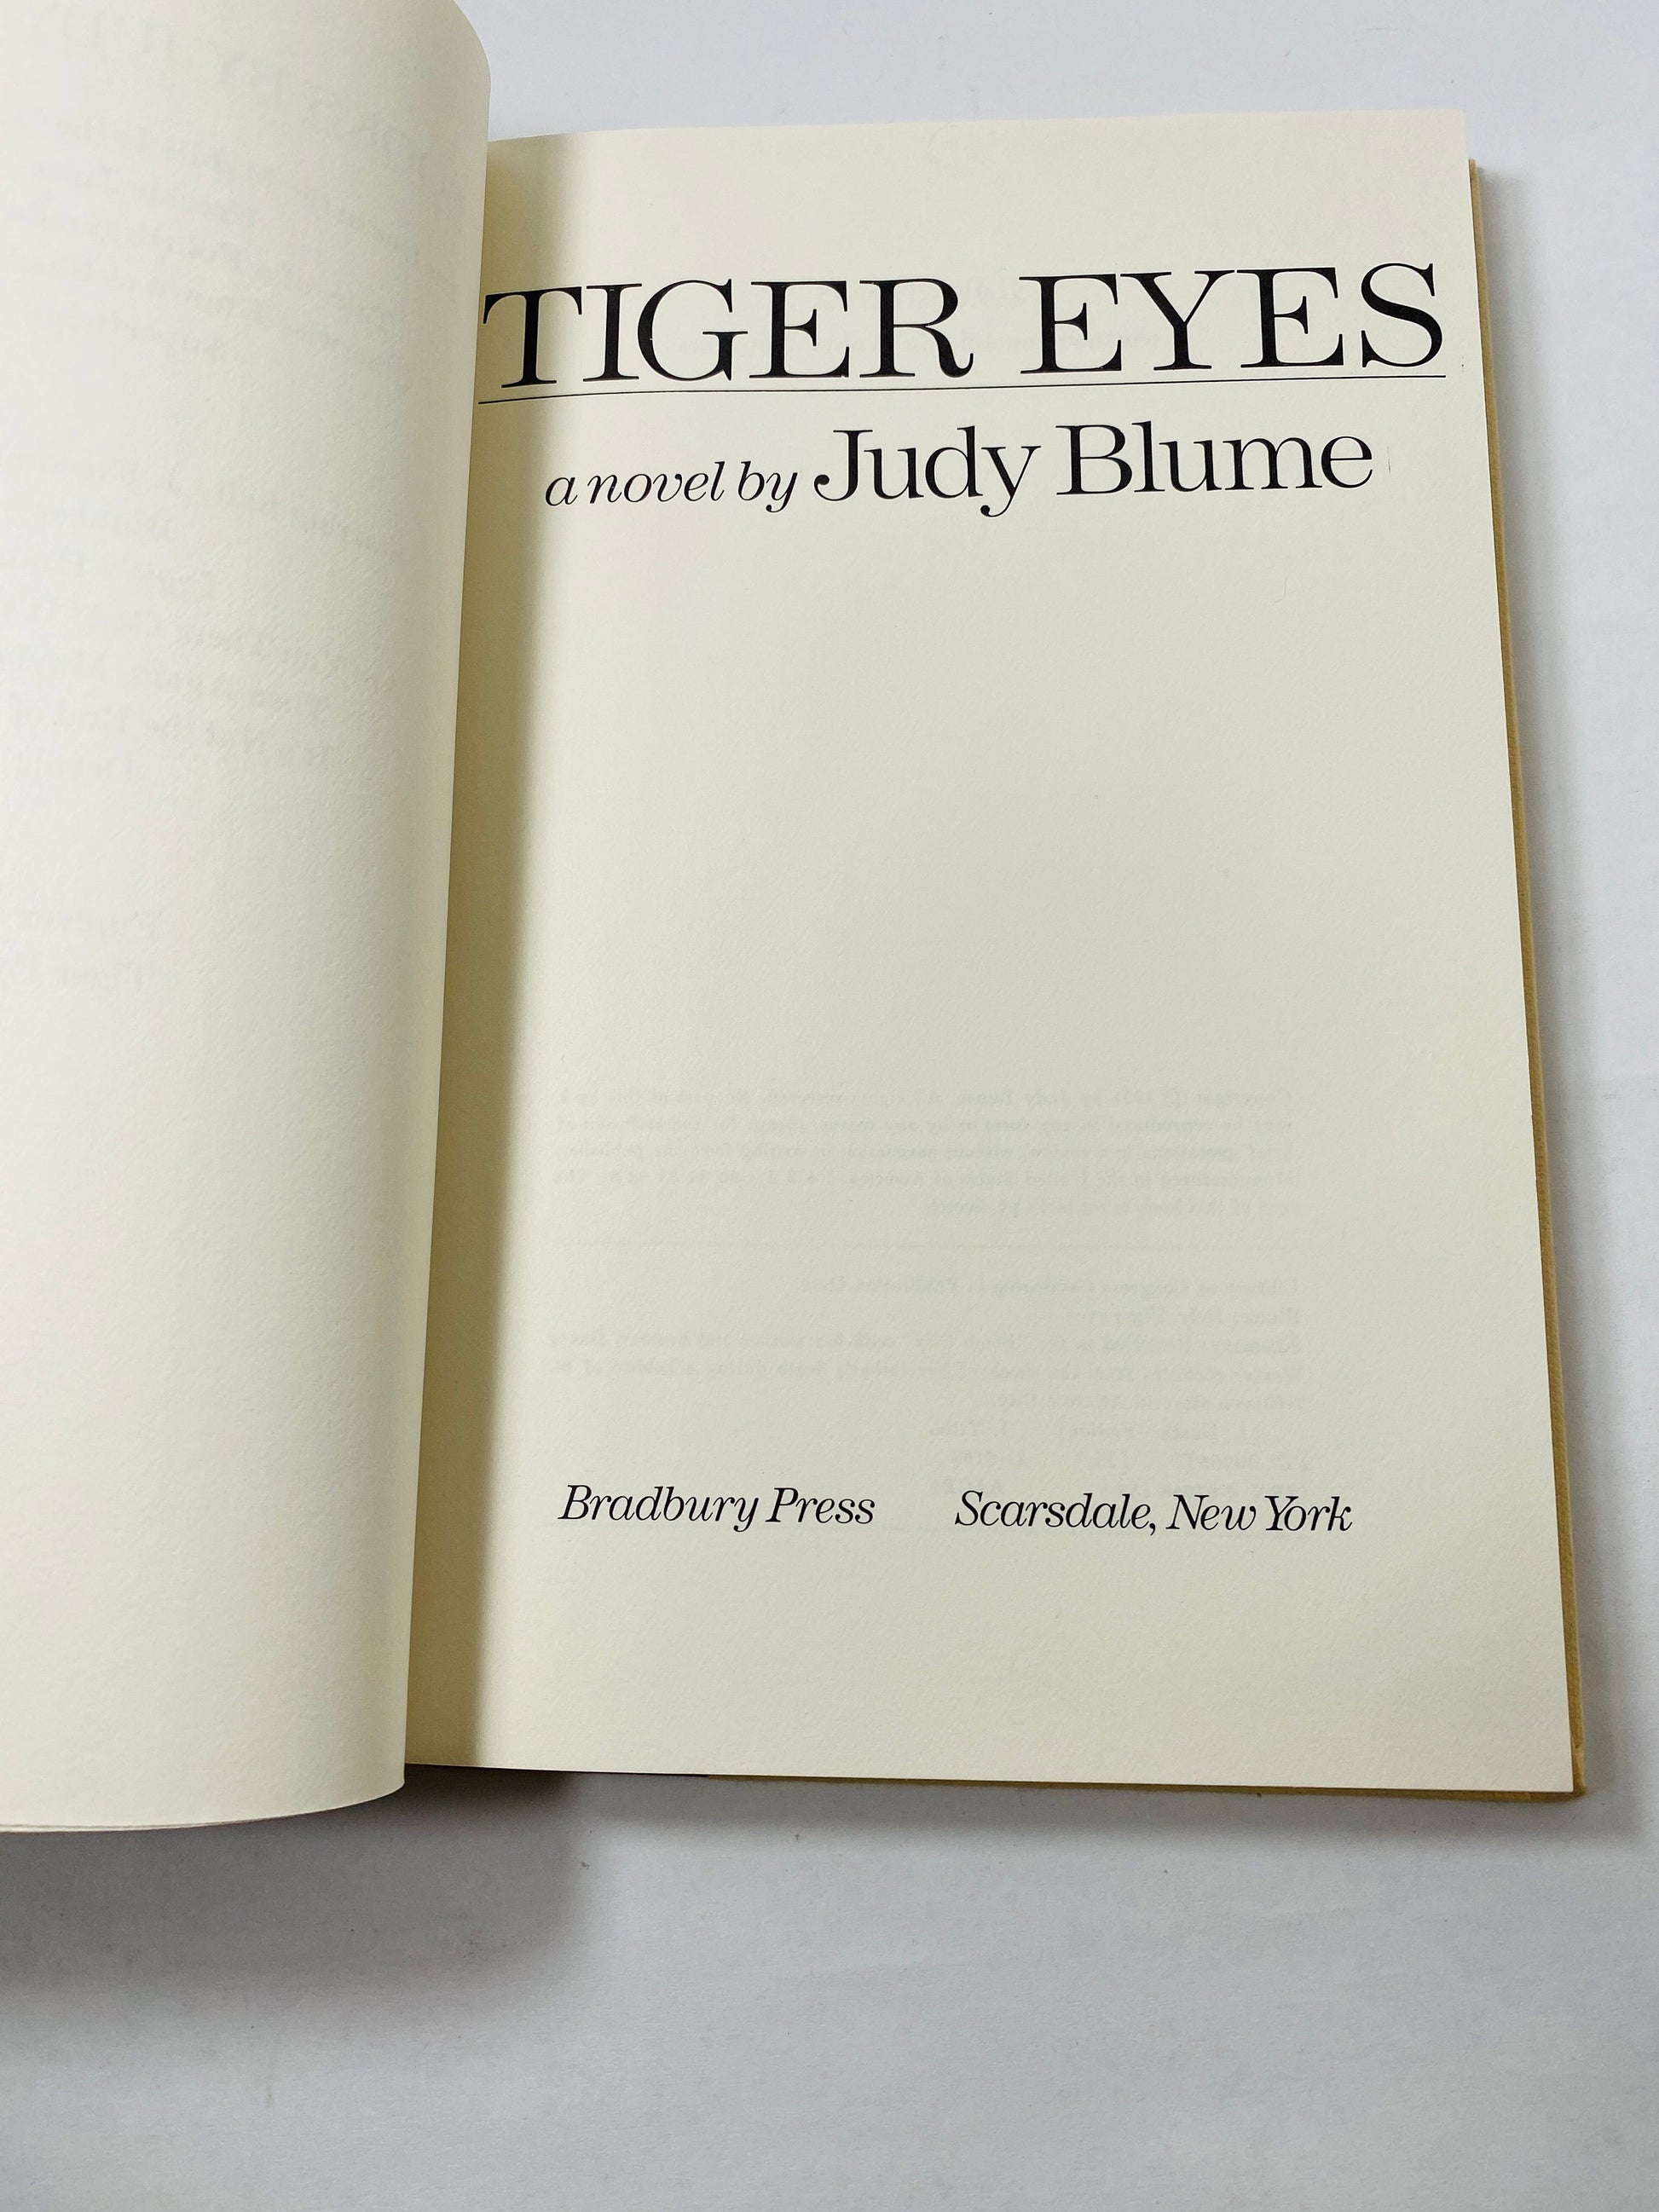 Tiger Eyes book by Judy Blume BANNED BOOK vintage First Edition book circa 1981 Teen attempting to cope with the death of her father